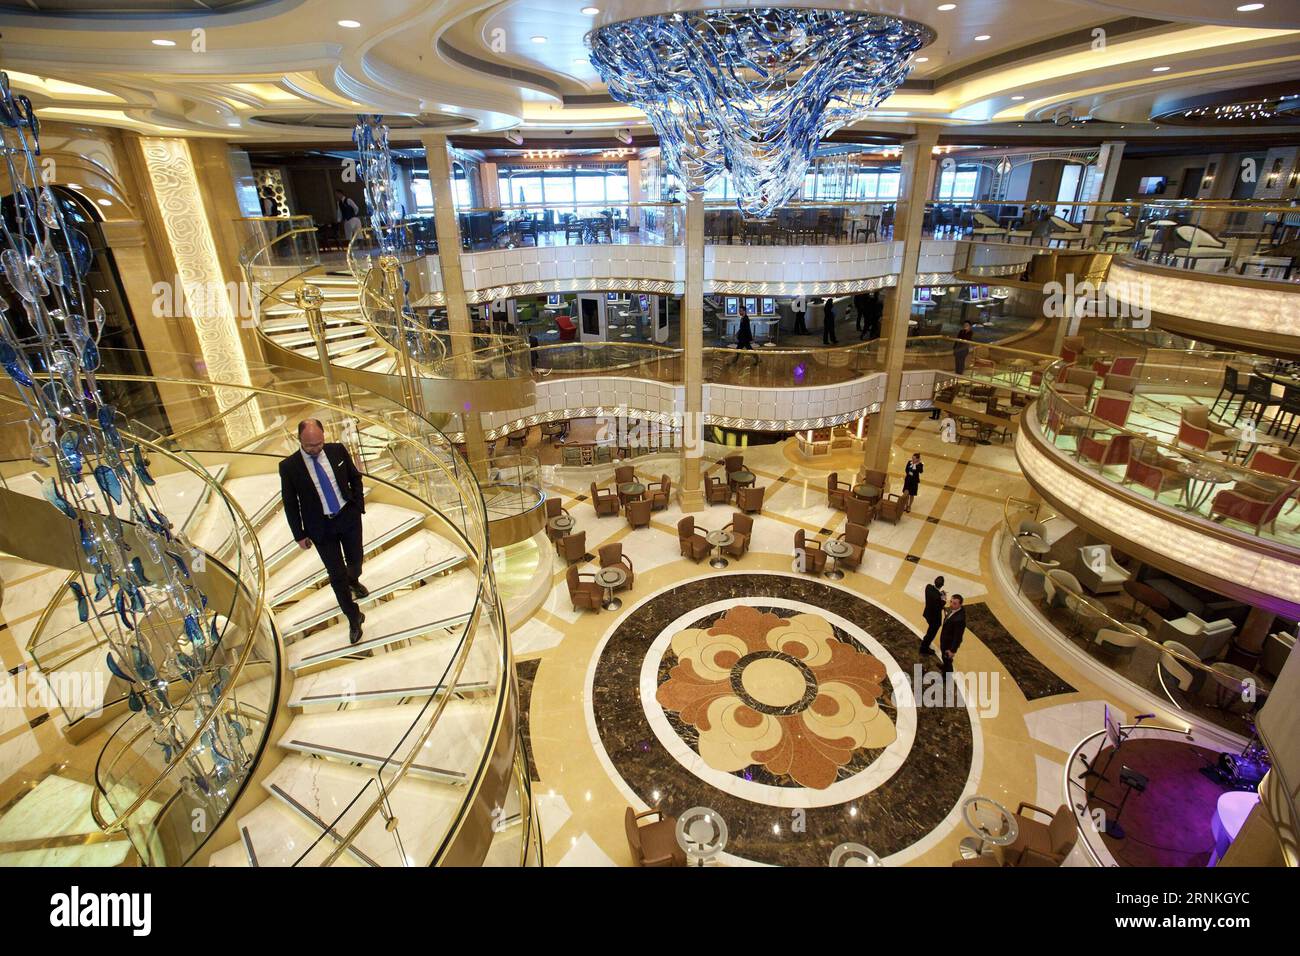 (170331) -- MONFALCONE, March 31, 2017 -- Photo taken on March 30, 2017 shows the interior of the luxury cruise ship Majestic Princess at the factory in Monfalcone, Italy. Majestic Princess, an international luxury cruise ship tailored specifically for China s market, will start her inaugural season in Europe on Friday. ) (zf) ITALY-MONFALCONE-CRUISE-MAJESTIC PRINCESS-HANDOVER-SILK ROAD SEA ROUTE JinxYu PUBLICATIONxNOTxINxCHN   Monfalcone March 31 2017 Photo Taken ON March 30 2017 Shows The Interior of The Luxury Cruise Ship Majestic Princess AT The Factory in Monfalcone Italy Majestic Princes Stock Photo